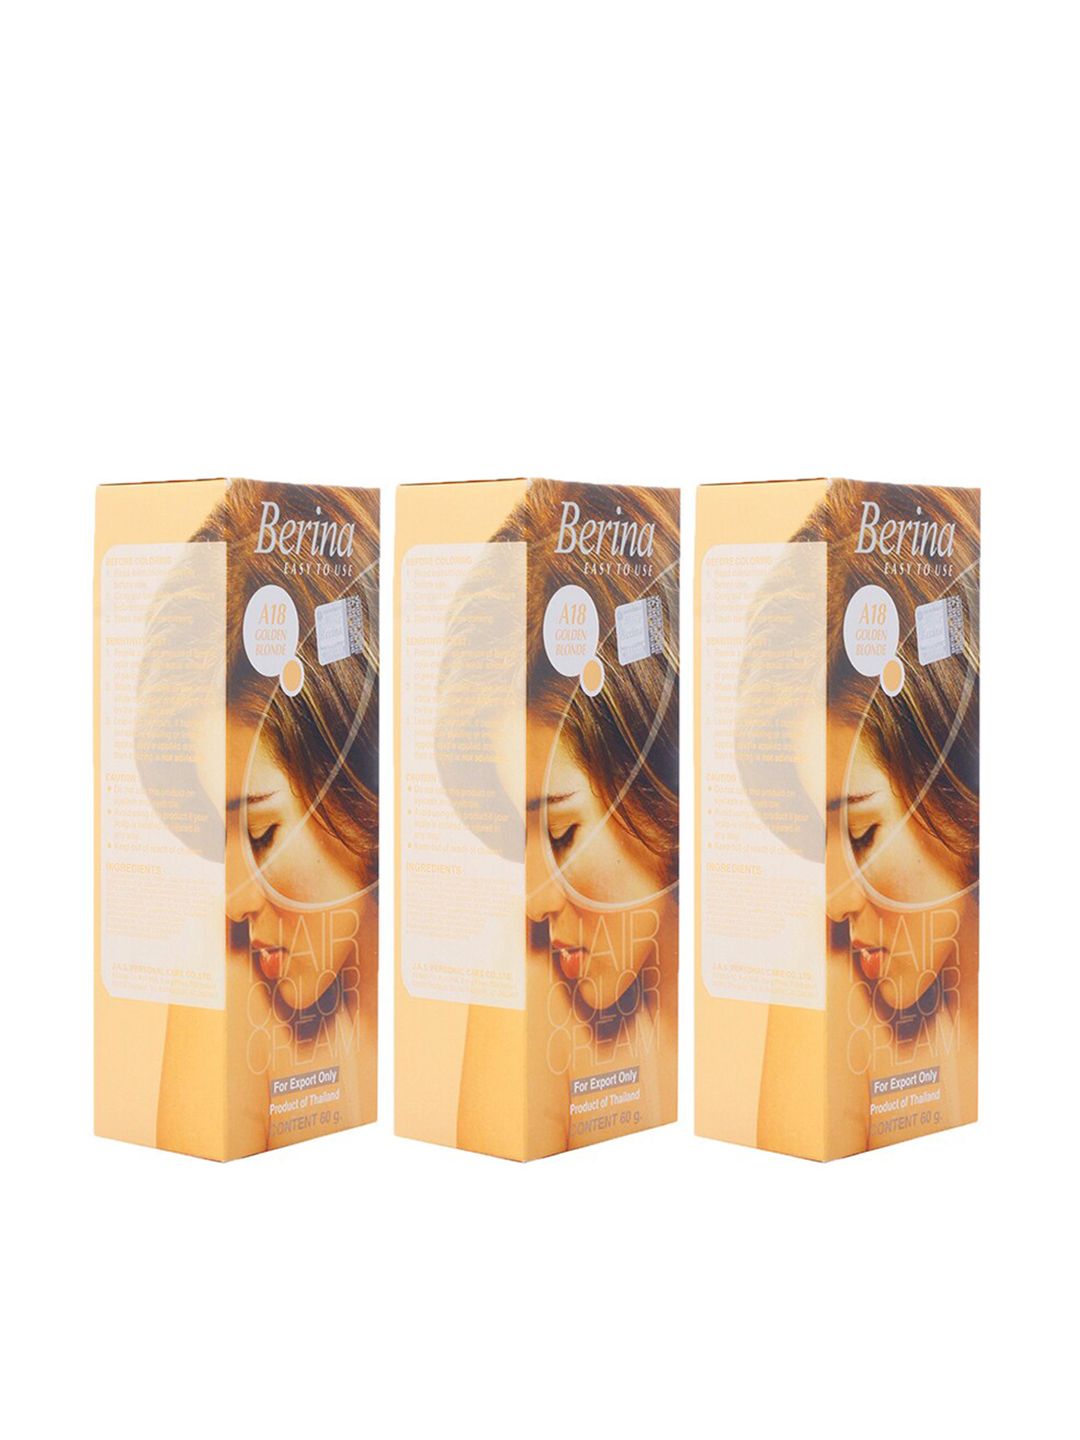 Berina Pack of 3 Hair Color Cream A18 Golden Blonde Price in India